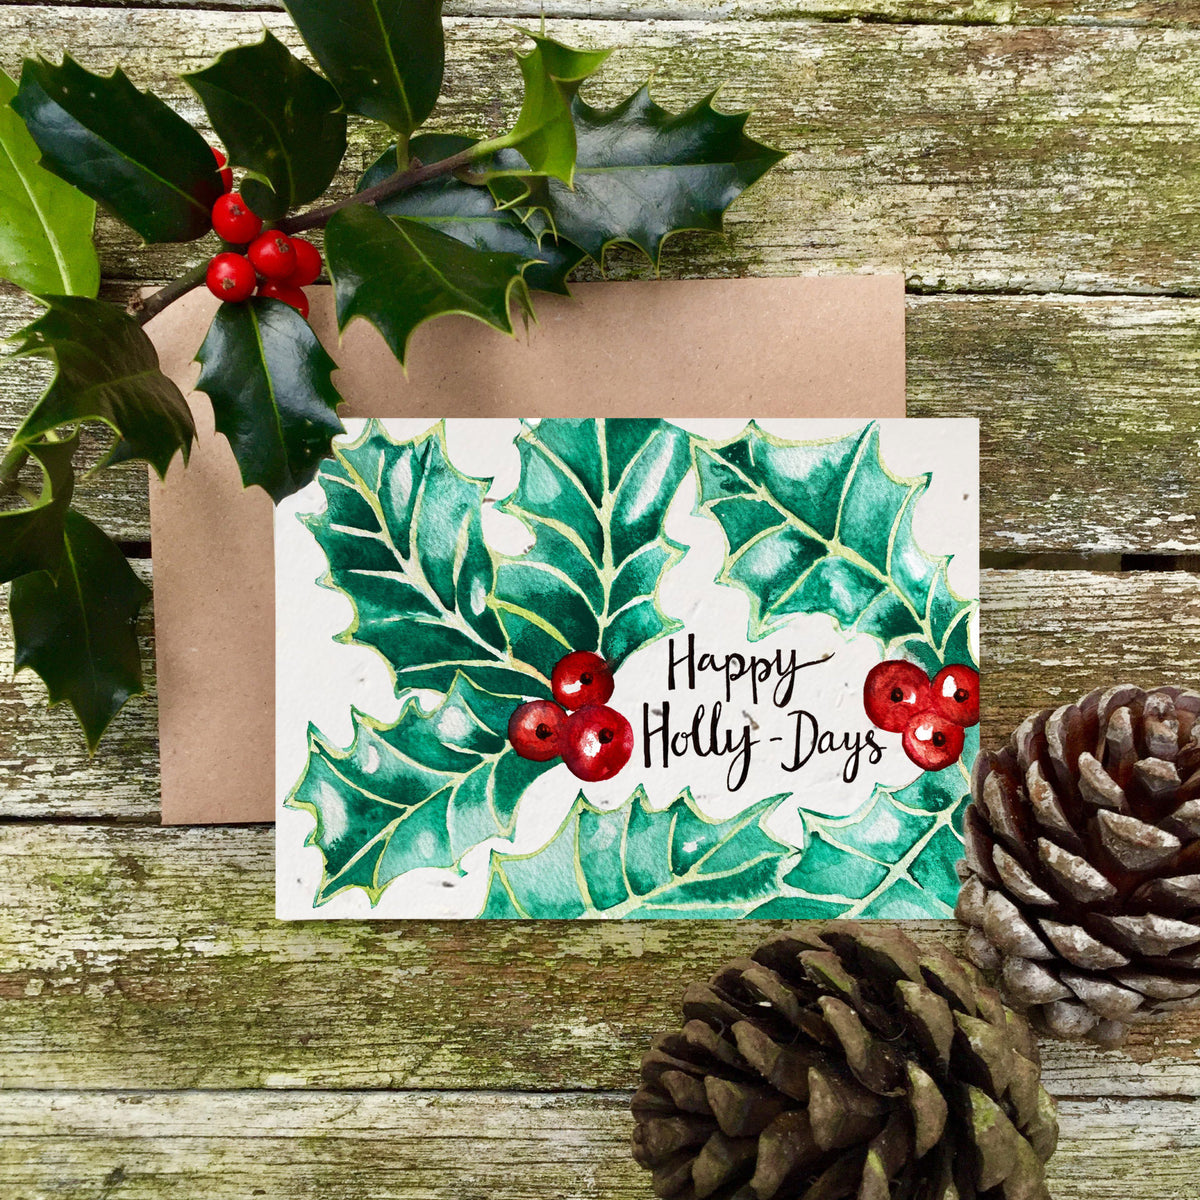 Happy Holly-Days - Plantable Wildflower Christmas Card | Greetings Card - The Naughty Shrew